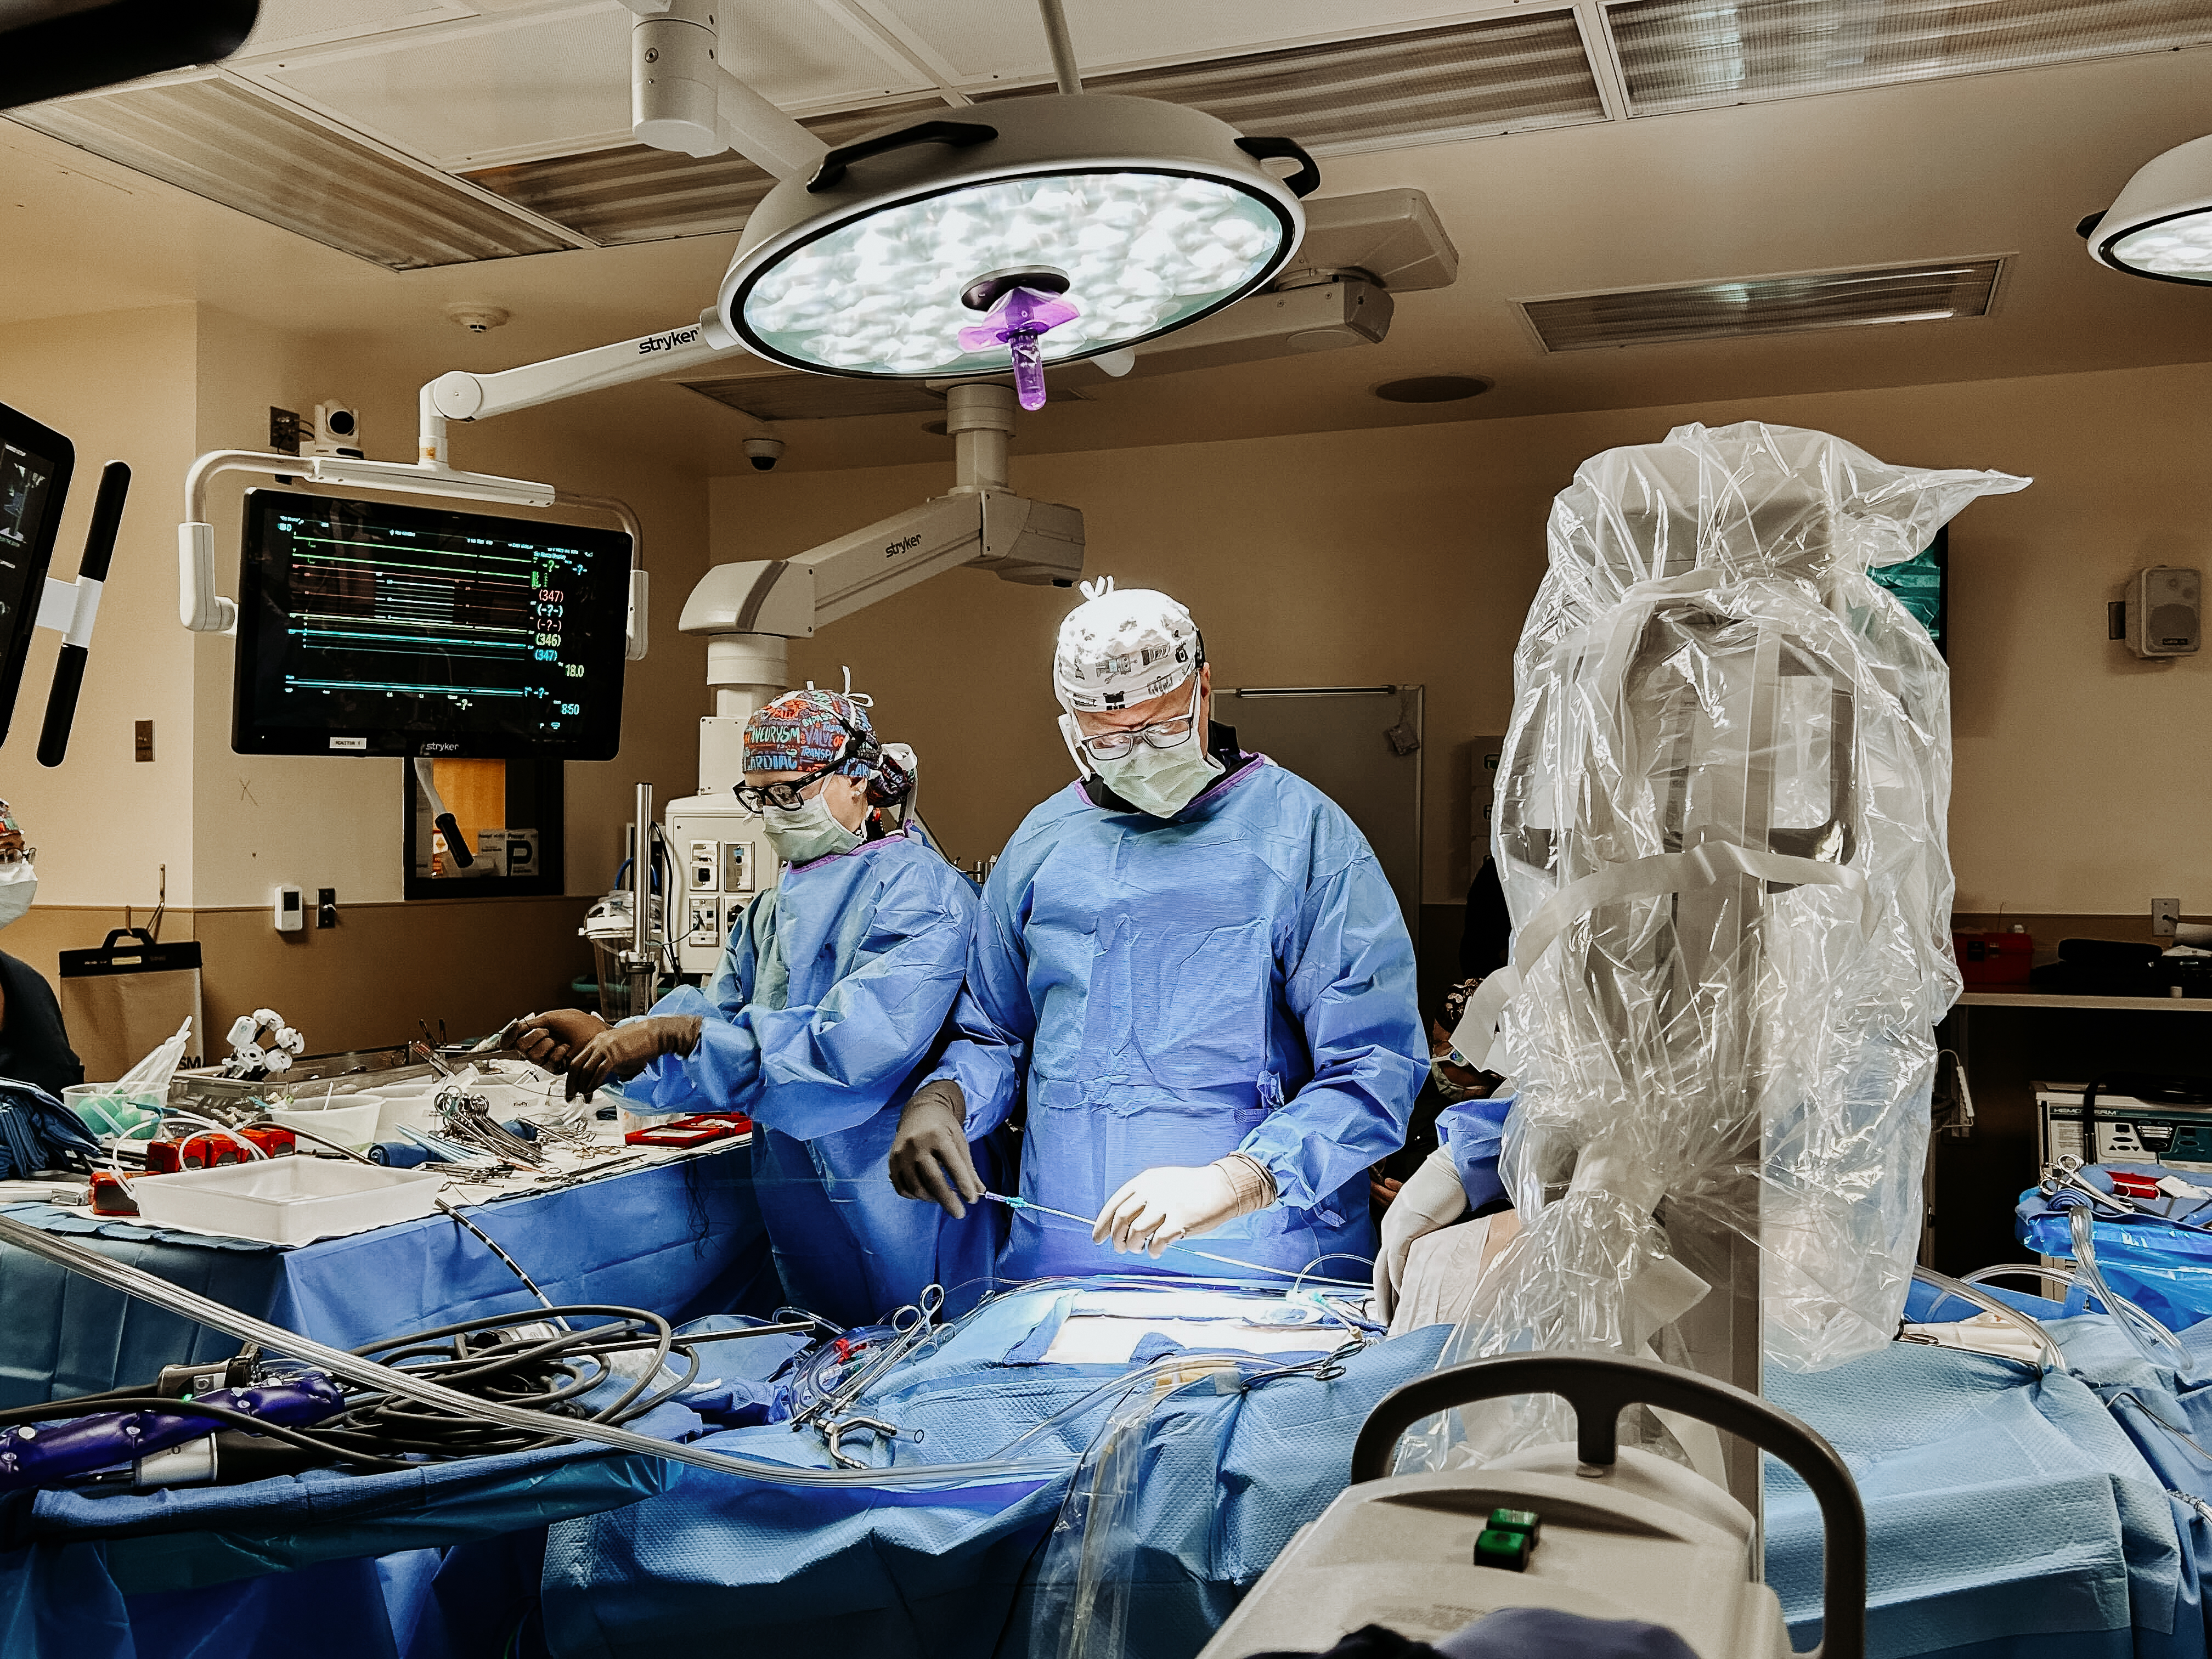 T. Sloane Guy, a robotic heart surgeon, in operating room at Northeast Georgia Medical Center (NGMC) in Gainesville.